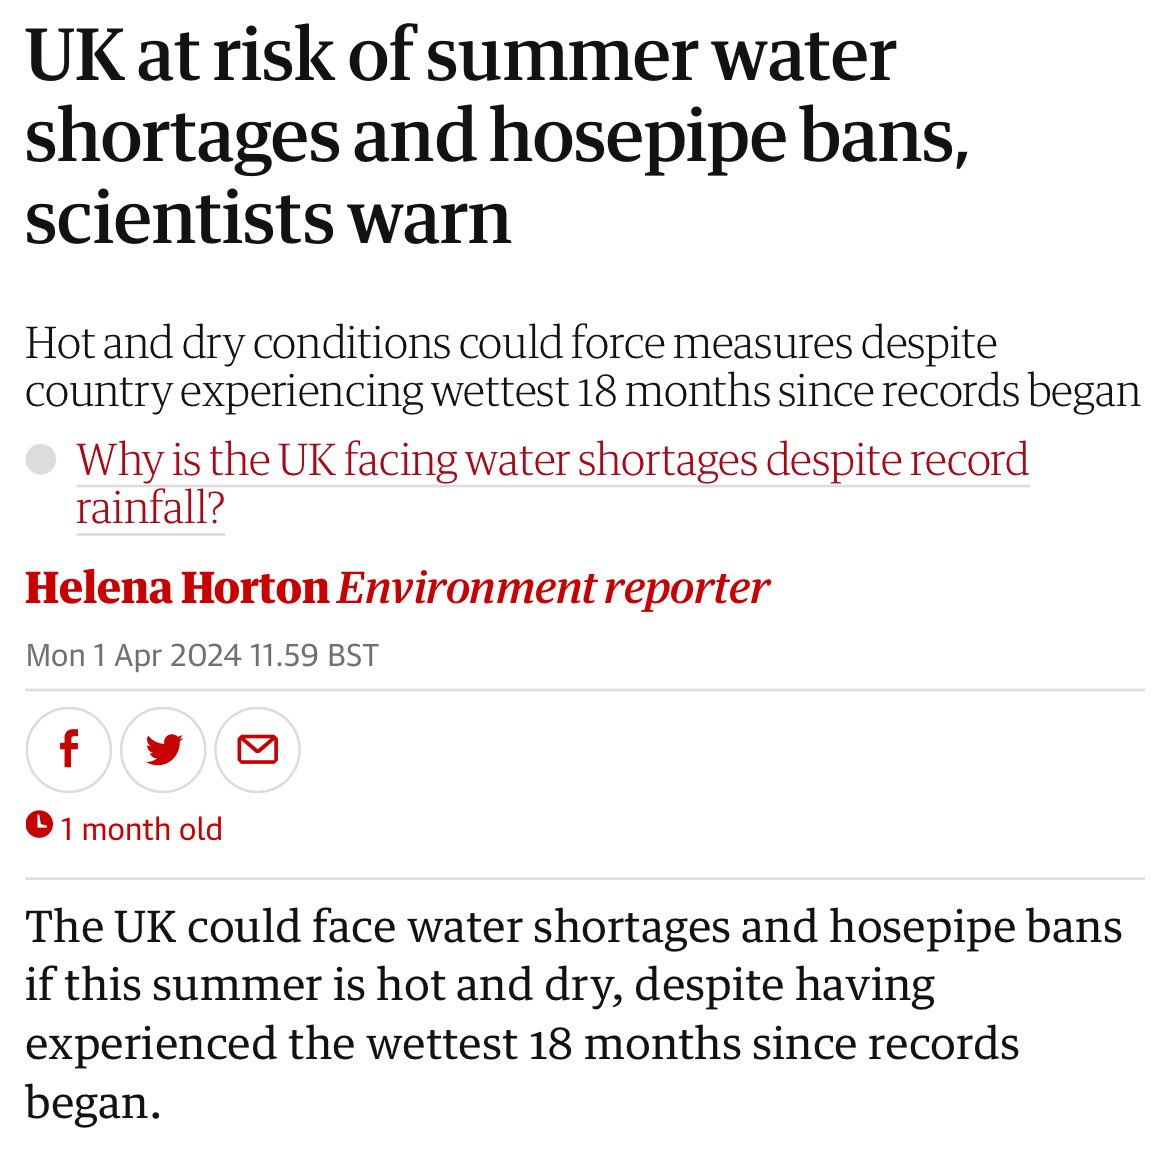 We've endured the wettest 18 months since they started measuring almost two centuries ago. Yet there's still a risk of water shortages because the same water companies that are releasing billions of litres of untreated sewage can't store the water properly. Only in Britain...